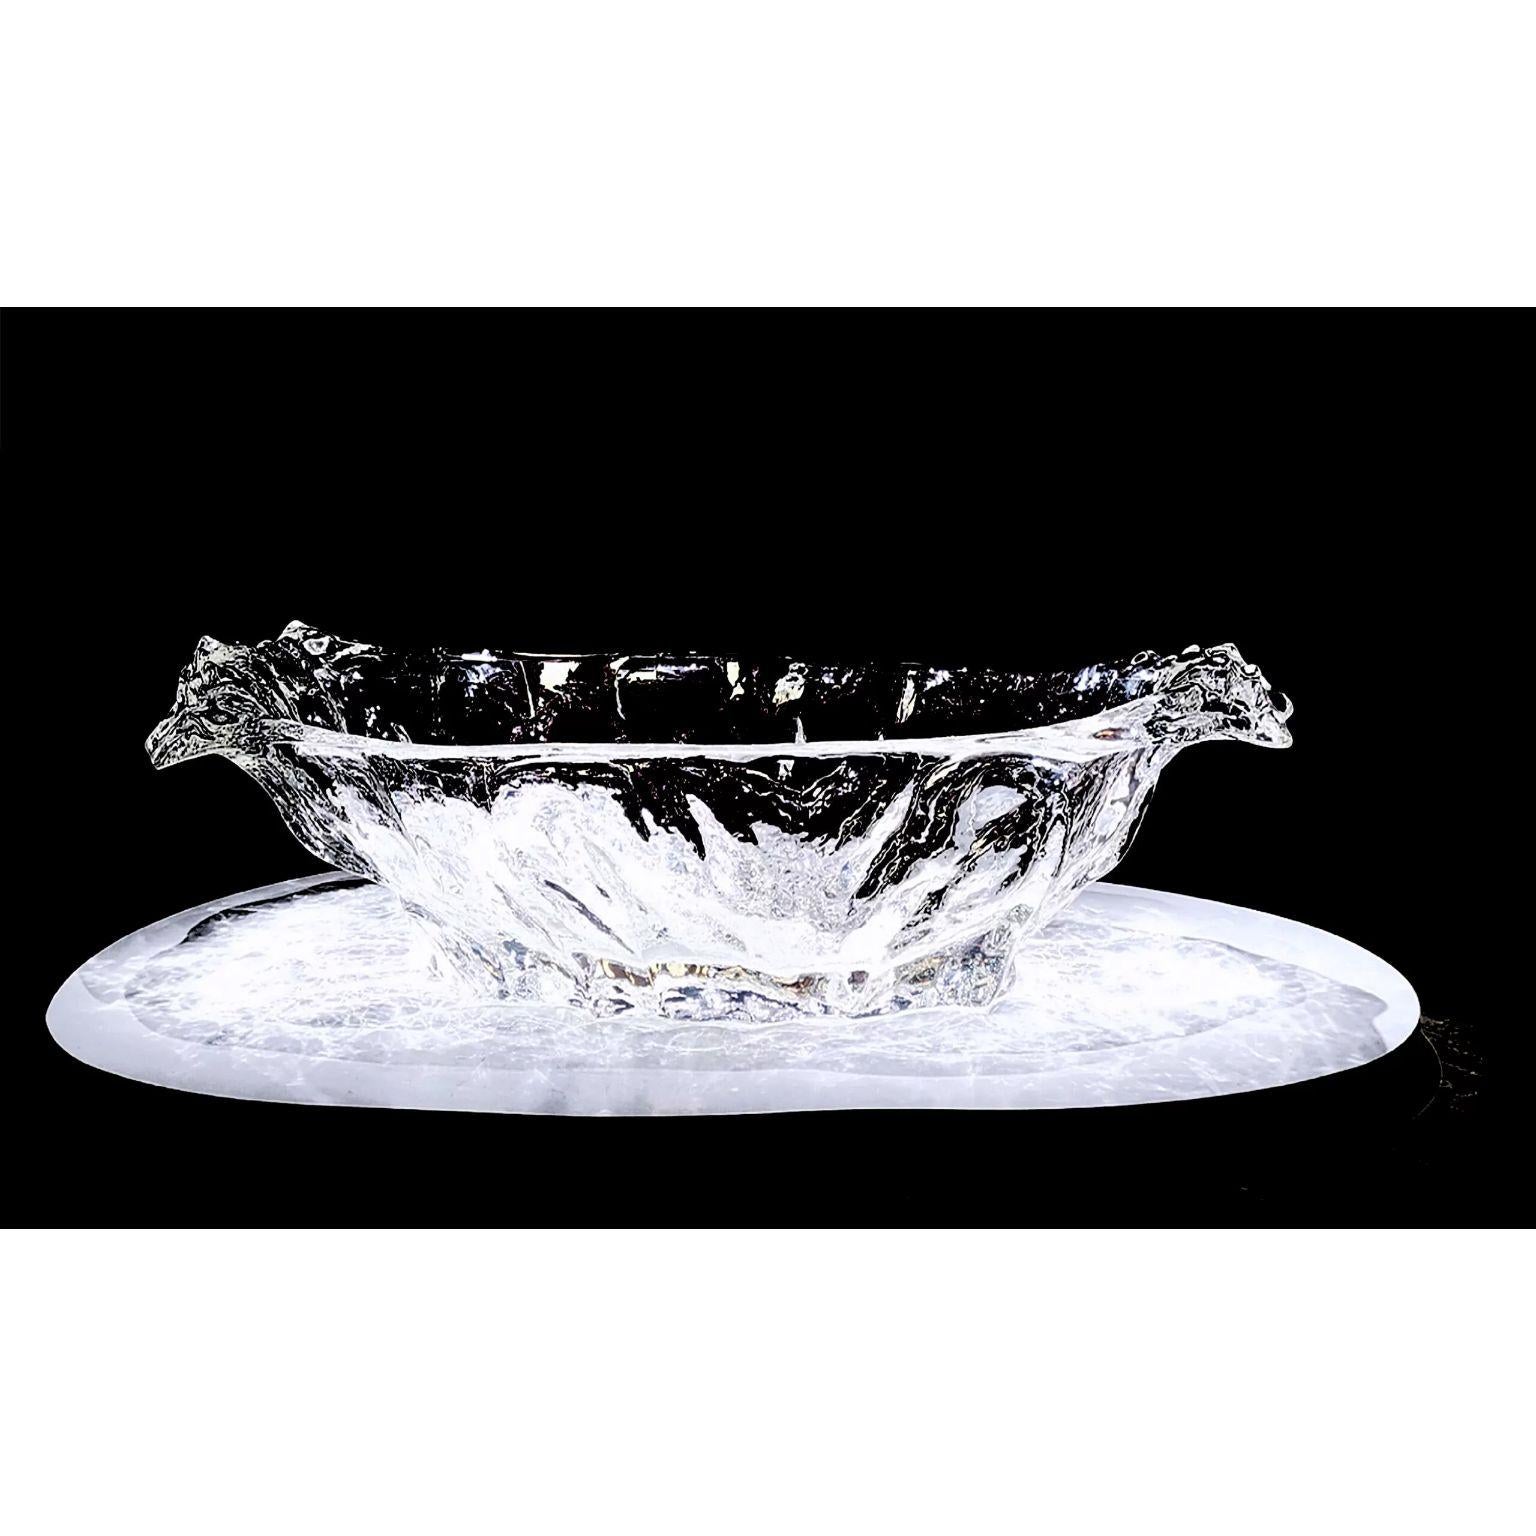 Branched Iconic Master Bathtub by Dainte
Dimensions: D 140 x W 280 x H 75 cm.
Materials: Mixed crystal.

Reconnect with the unbridled beauty and power of nature as the Branched Iconic Master Bathtub reminds your senses of the pure streams ebbing and